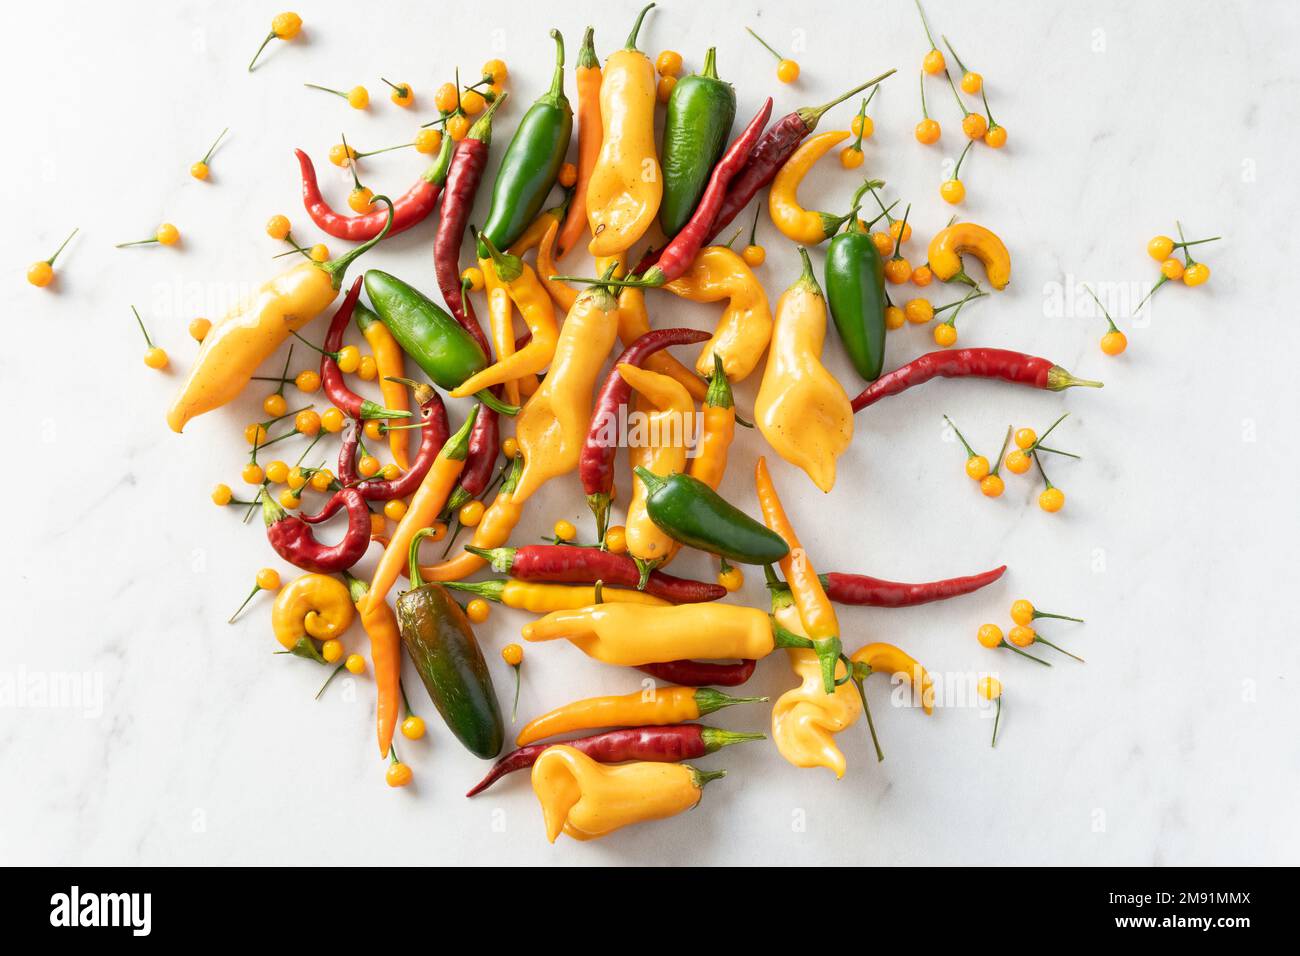 Bright yellow, green, and red chile peppers scattered on a white marble background; cooking Stock Photo